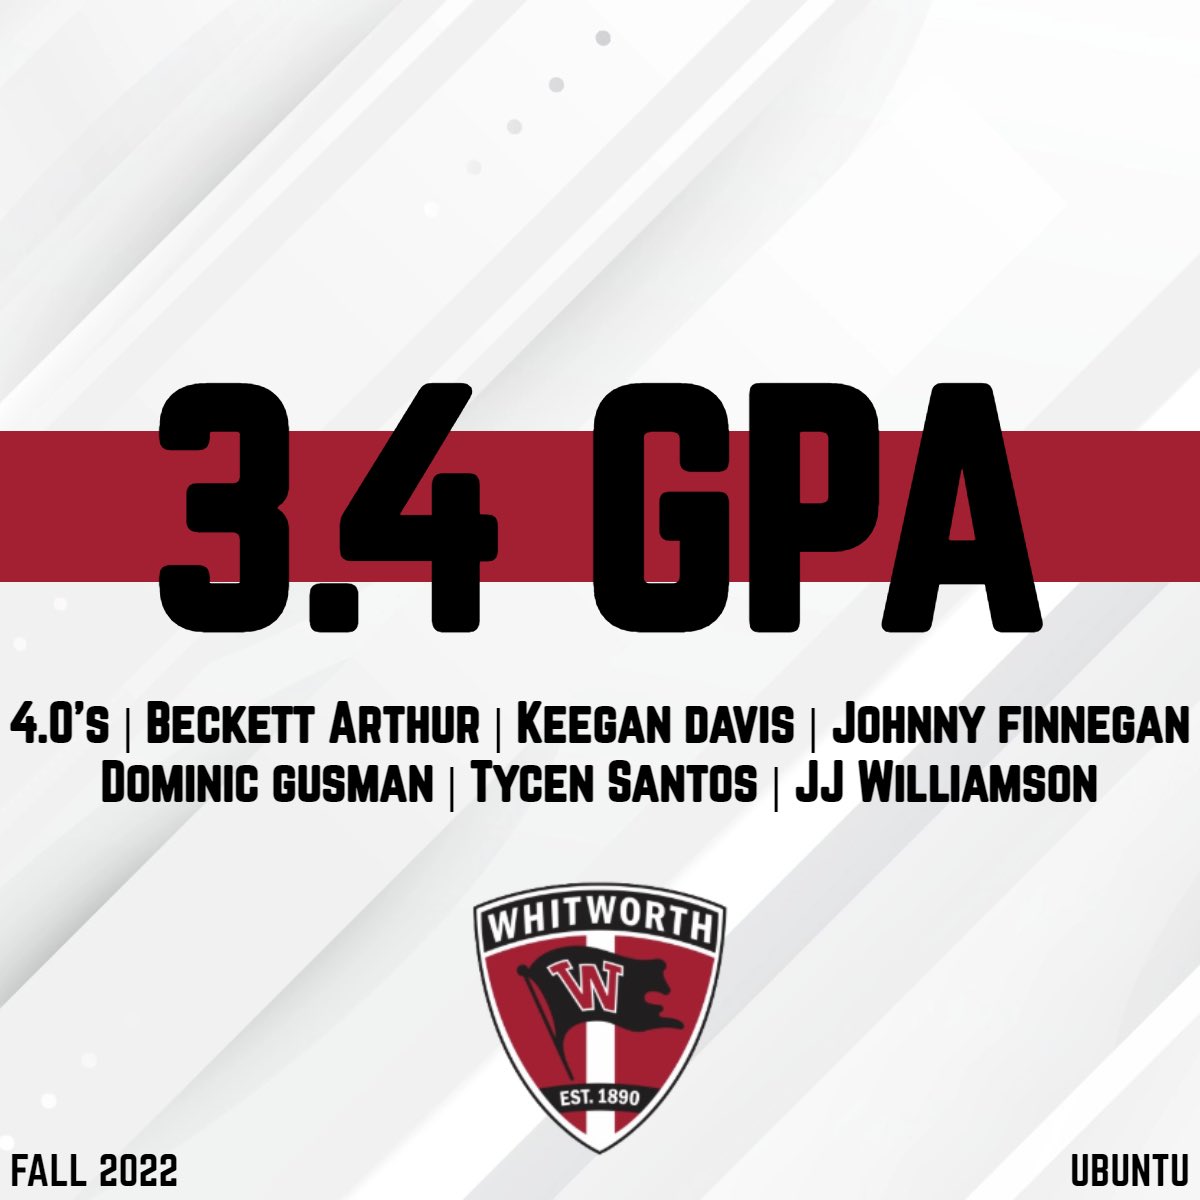 Another strong performance in the classroom 💪 🧠 

#whitworthsoccer #bucsball #ubuntu #bucsMSOC #gobucs #gobucs⚽️ #scobucs🏴‍☠️ #puma #pumasoccer #nwc #d3soccer #d3soc #pnwsoccer #spokanesoccer #collegesoccer #ncaasoccer